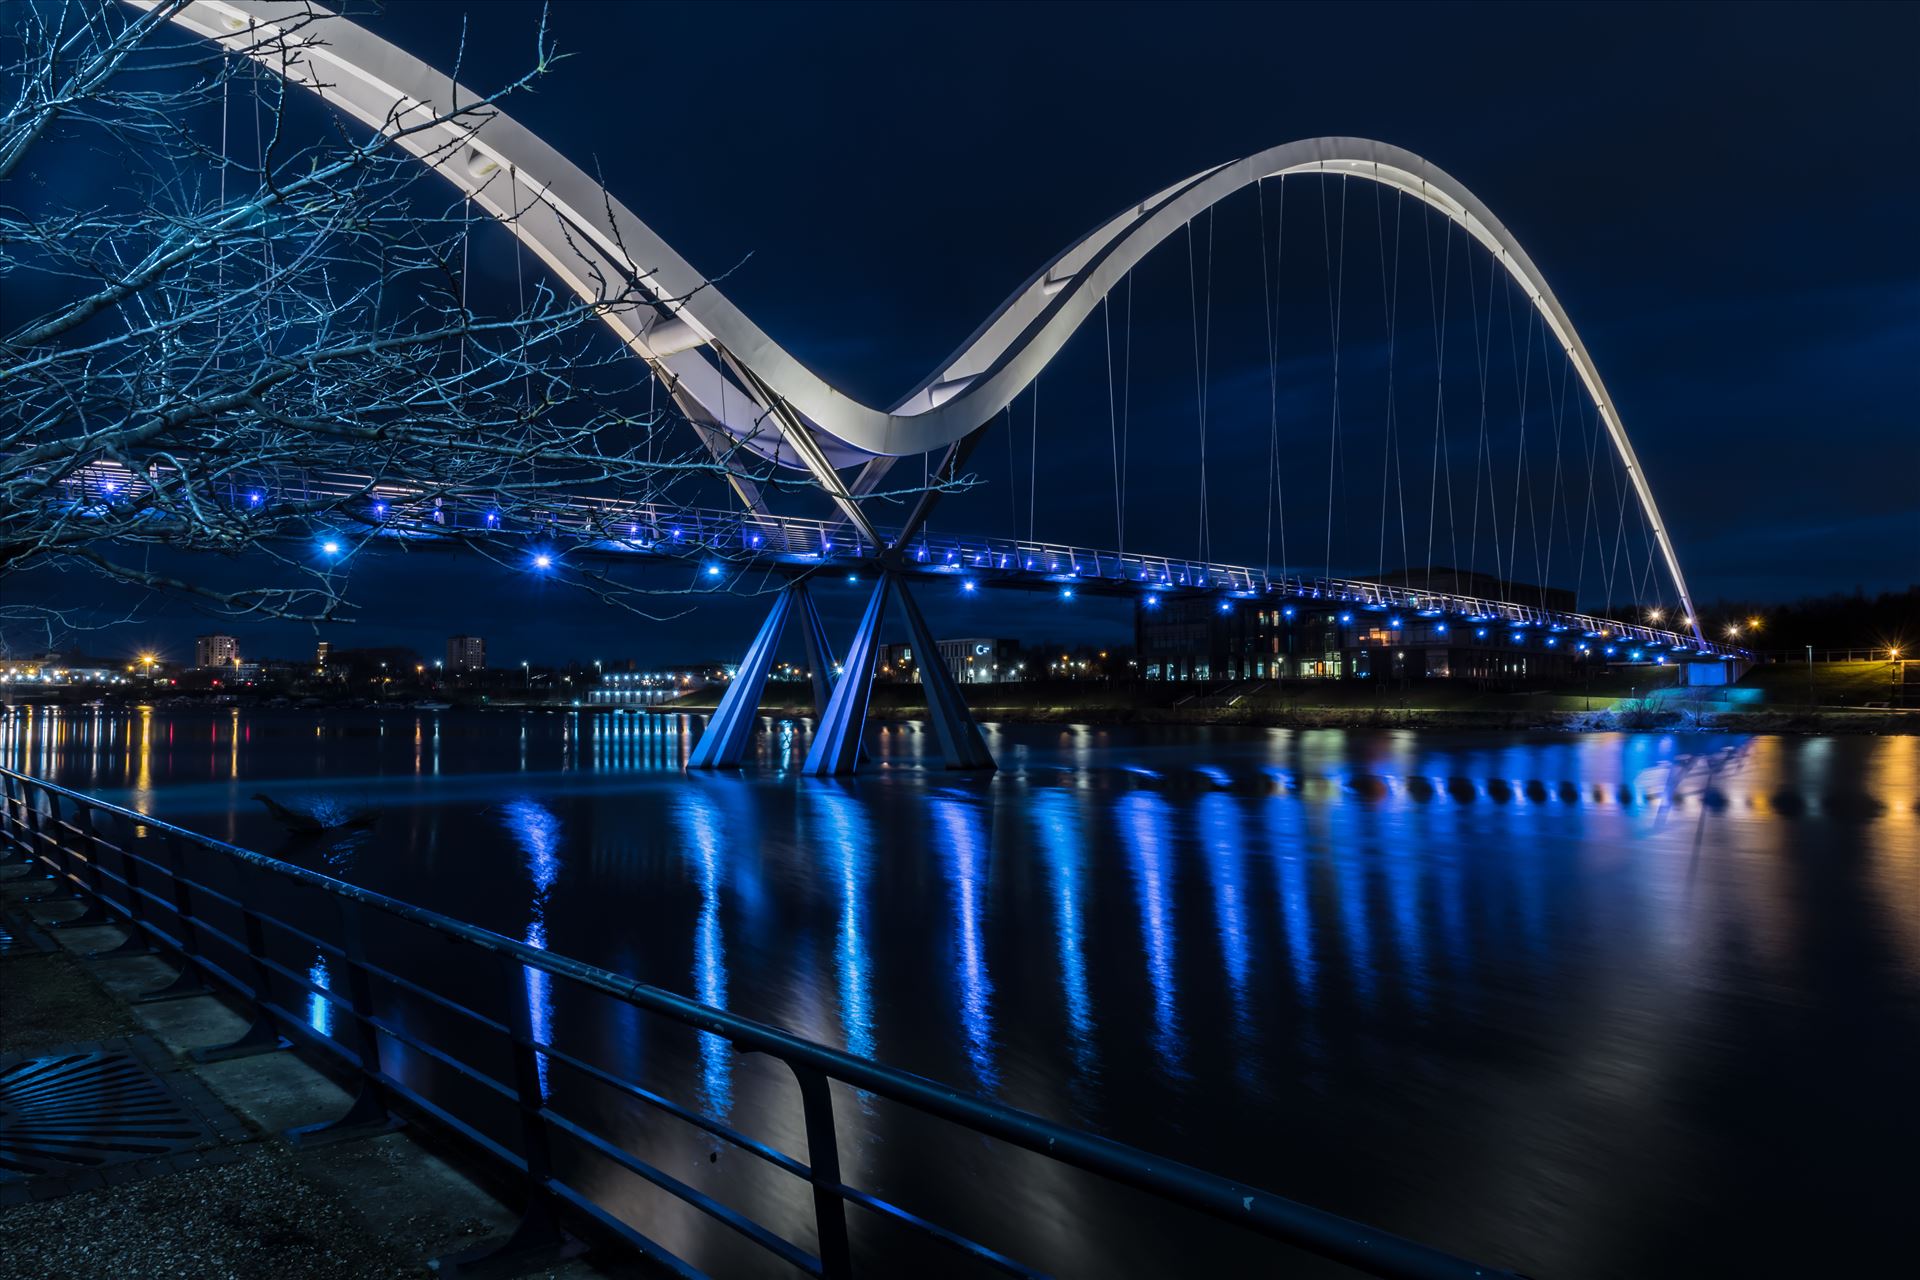 The Infinity Bridge 06 - The Infinity Bridge is a public pedestrian and cycle footbridge across the River Tees that was officially opened on 14 May 2009 at a cost of £15 million. by philreay